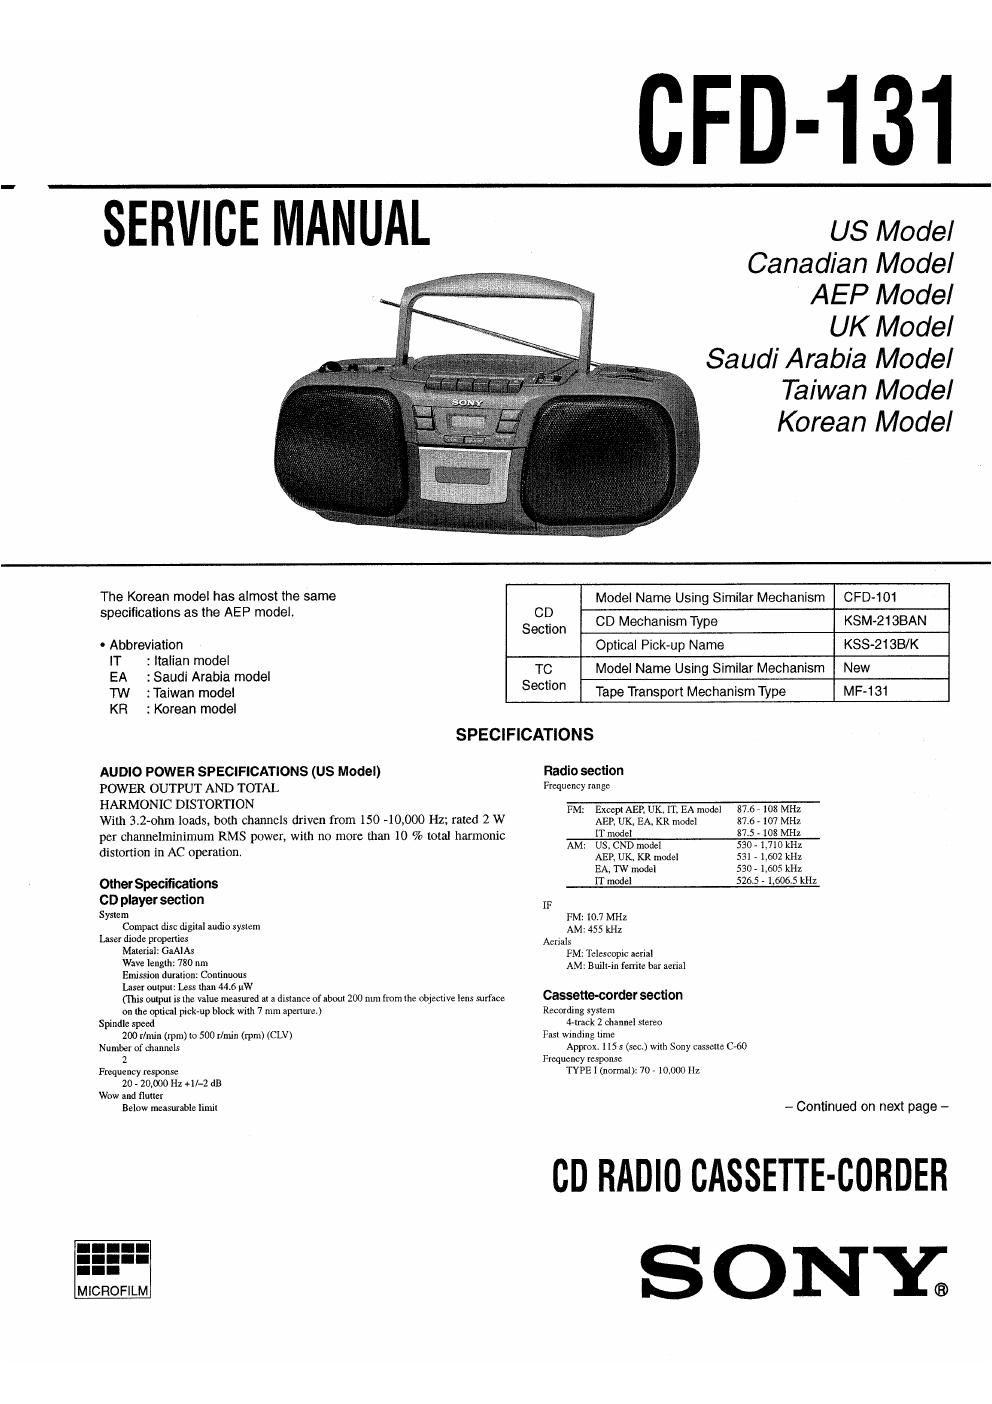 sony cfd 131 service manual